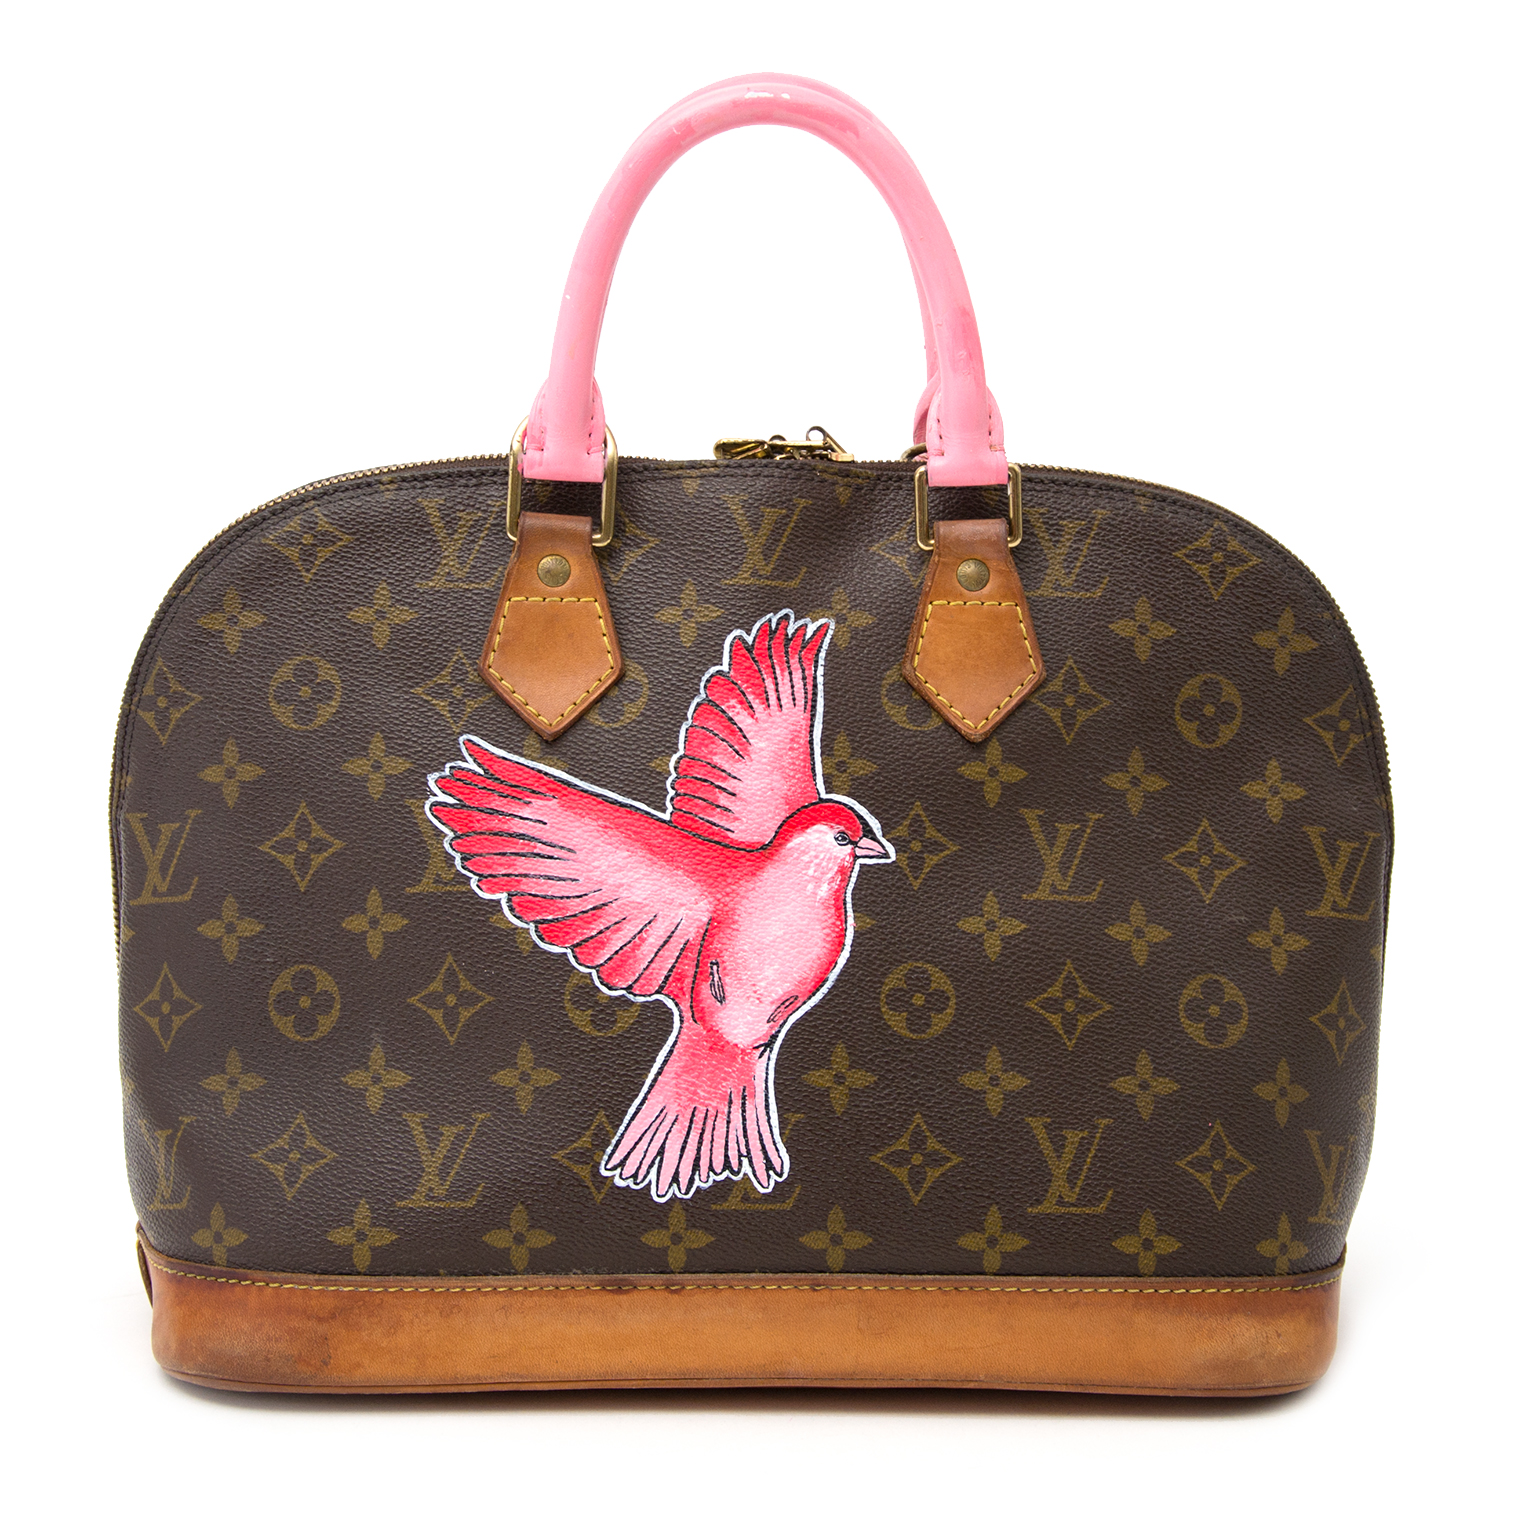 Painting on a Louis Vuitton Bag  step by step  YouTube